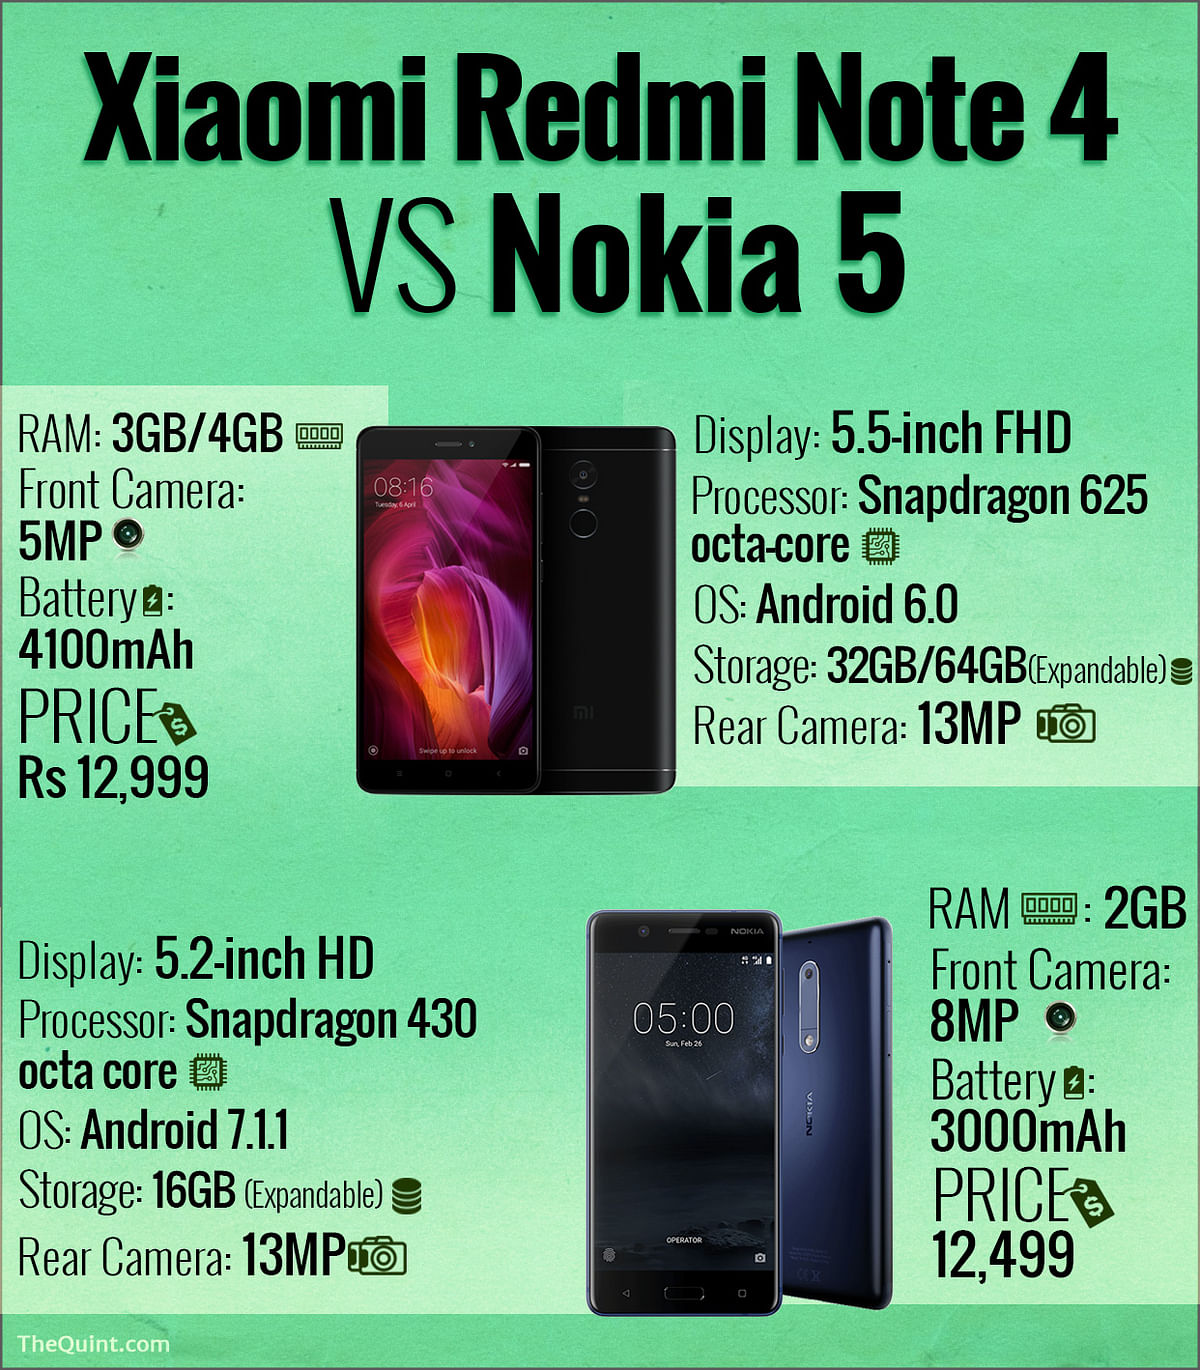 We have a quick comparison between the Nokia 5 and the Redmi Note 4. These are two hot phones under 15k.